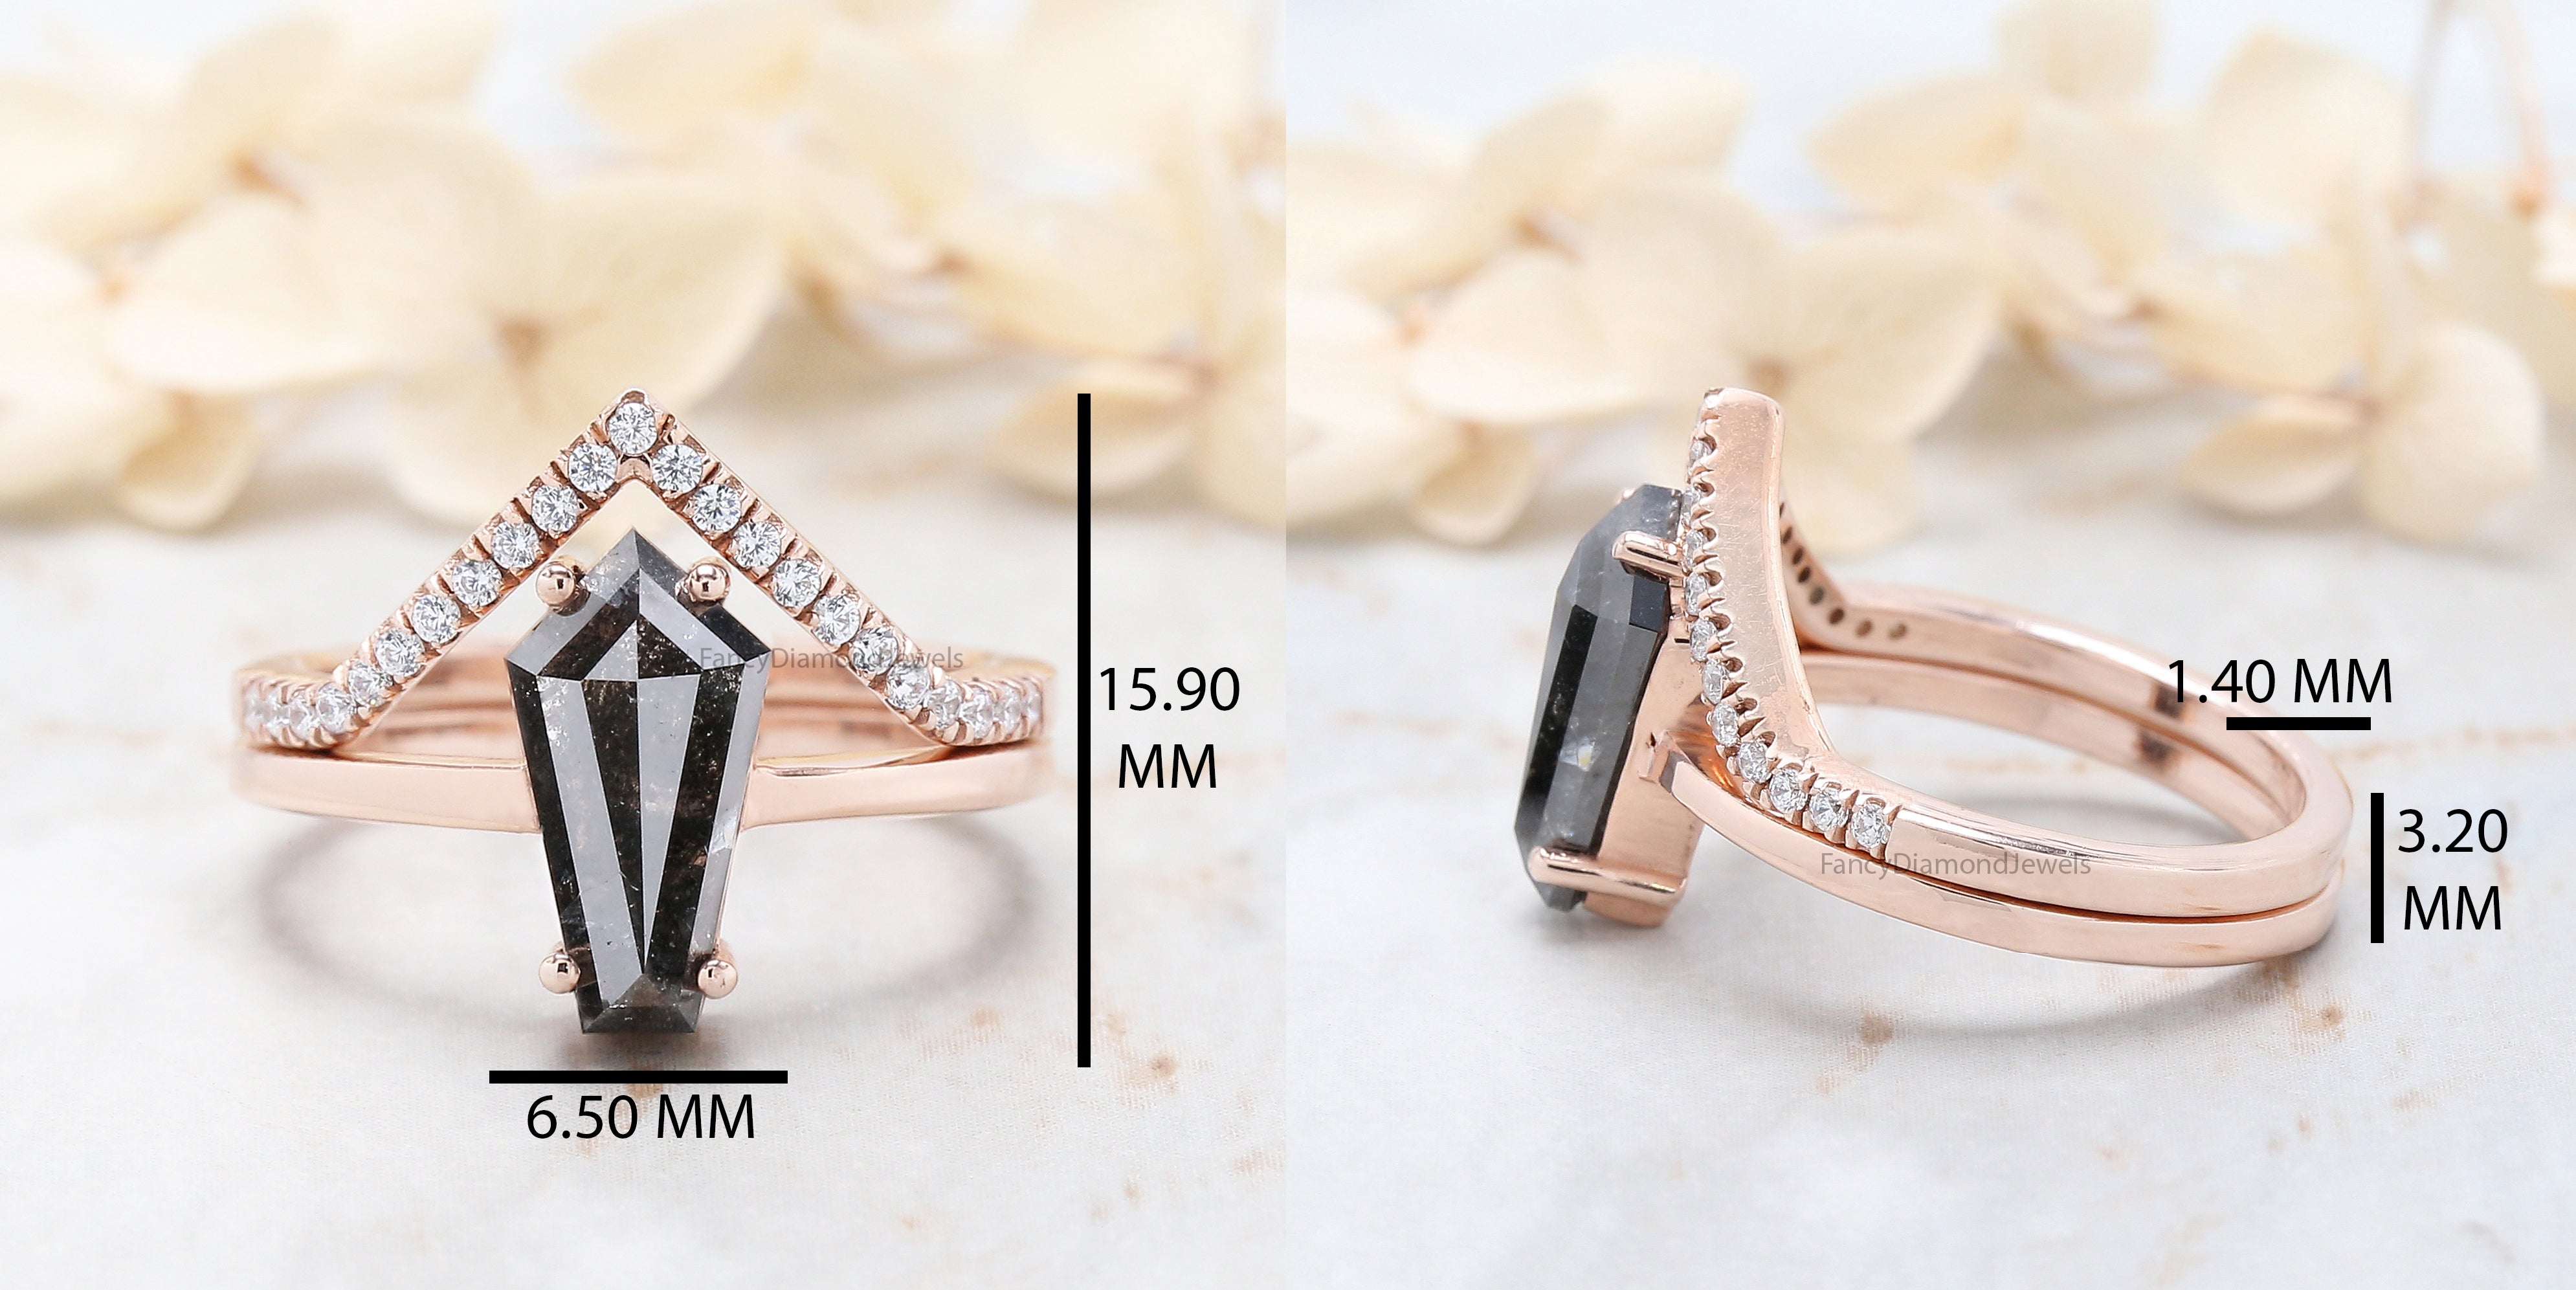 Shield Cut Salt And Pepper Diamond Ring 2.18 Ct 12.20 MM Shield Diamond Ring 14K Solid Rose Gold Silver Engagement Ring Gift For Her QL1169